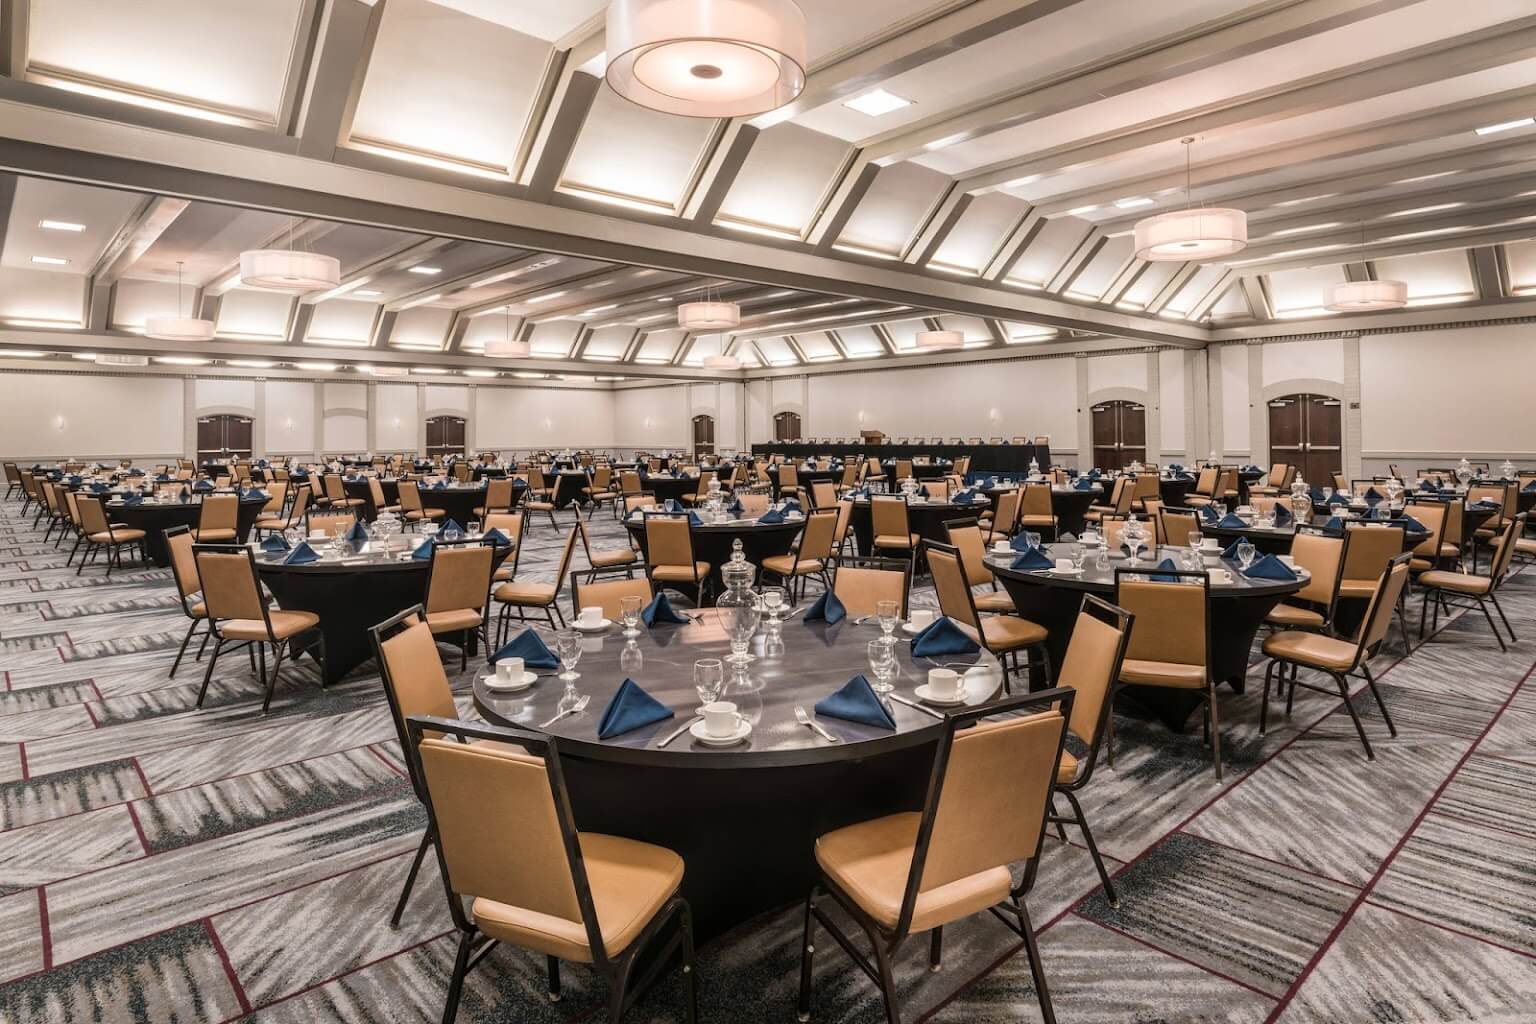 Large conference room with circular tables set for a meal